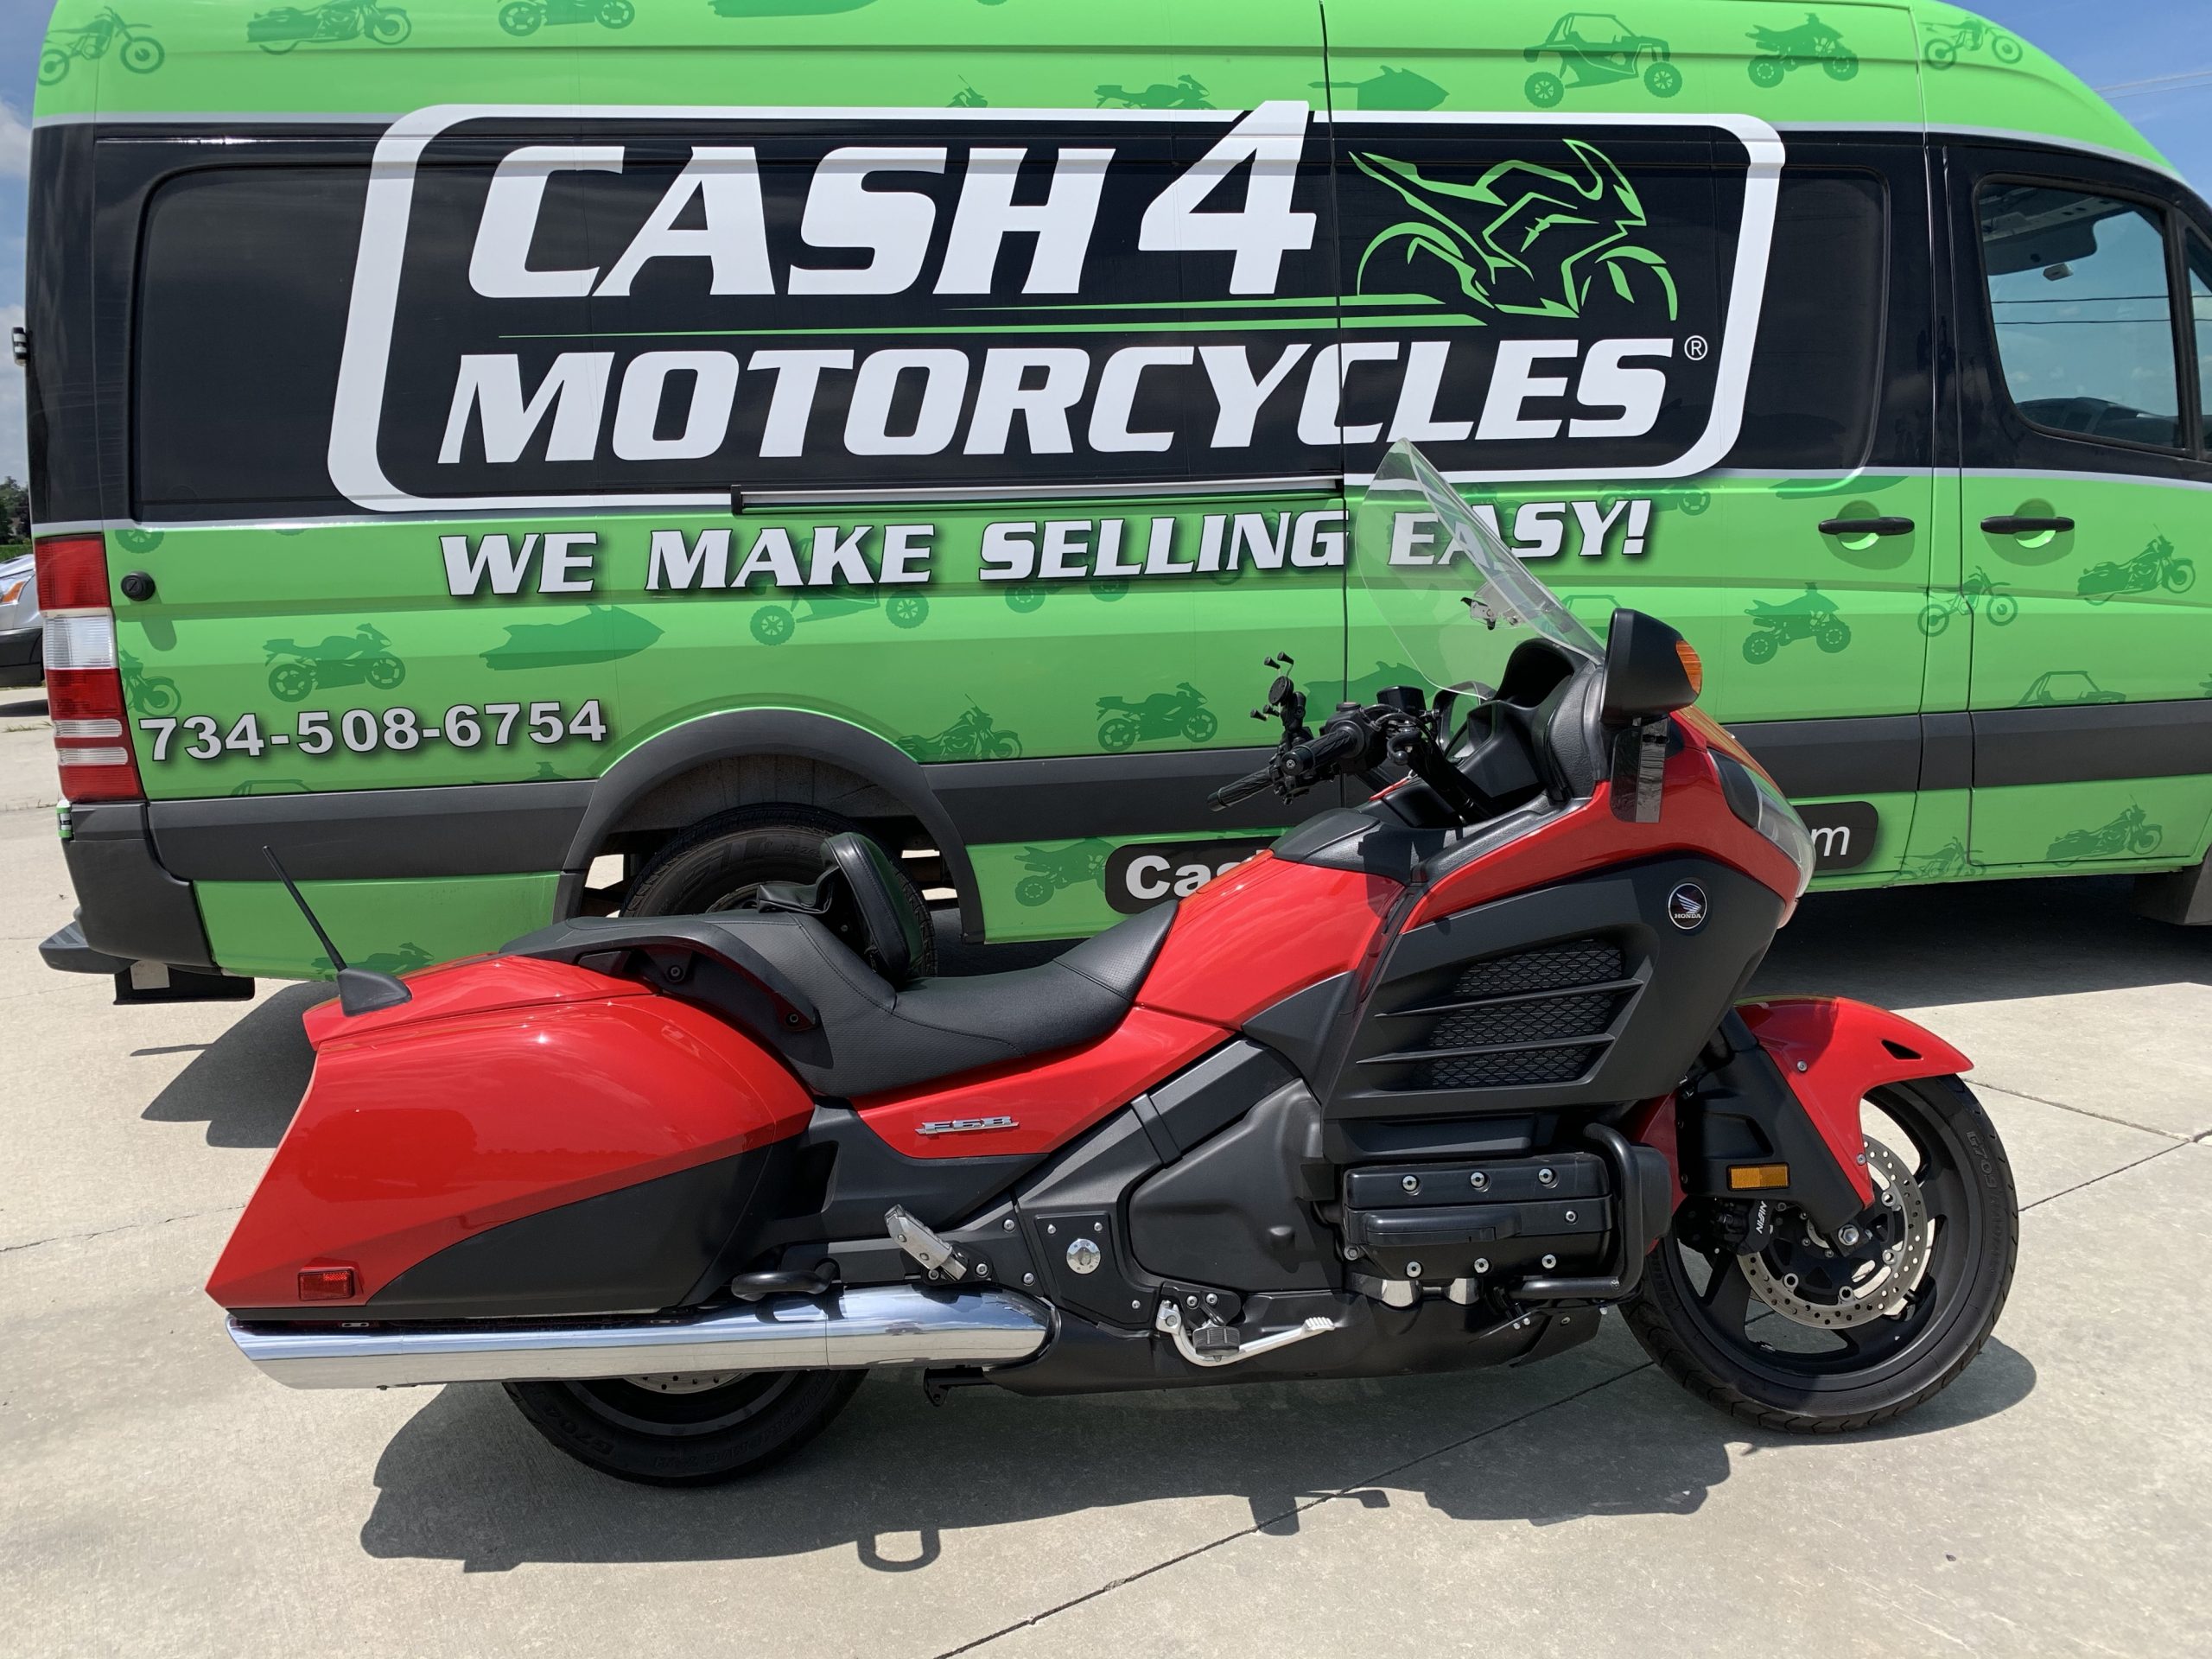 Cash 4 Motorcycles